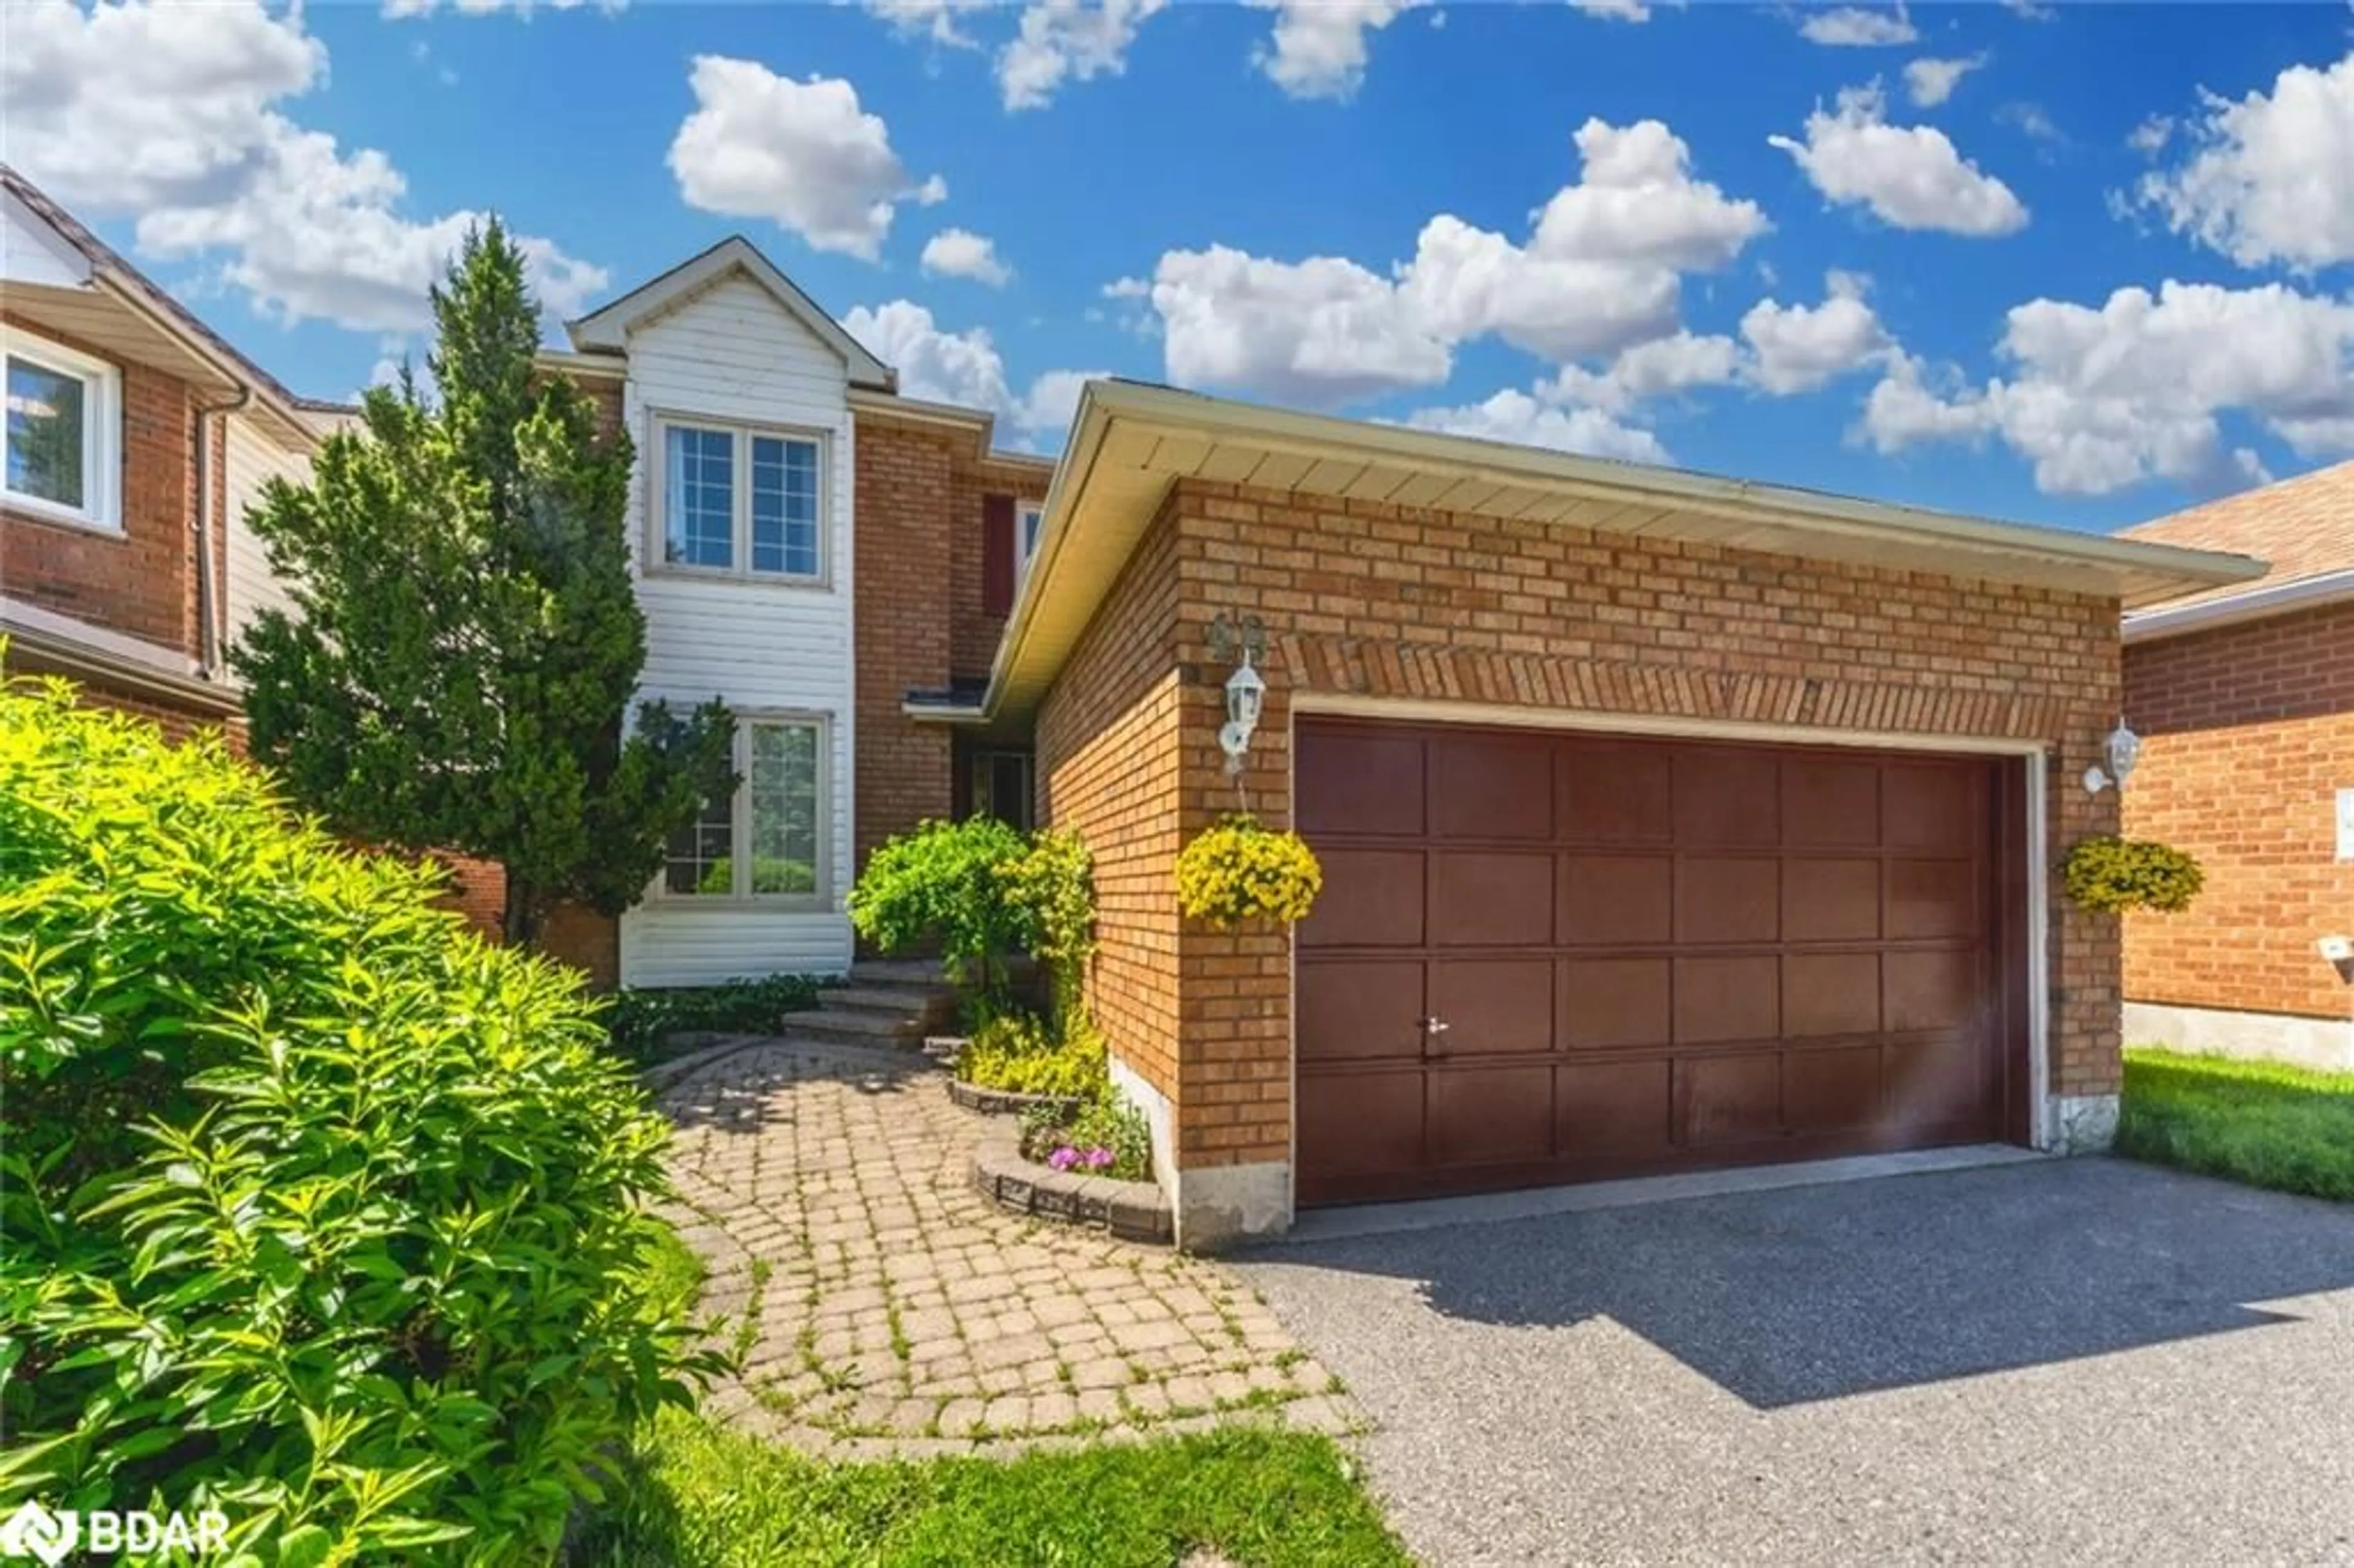 Home with brick exterior material for 48 O'shaughnessy Cres, Barrie Ontario L4N 7L8